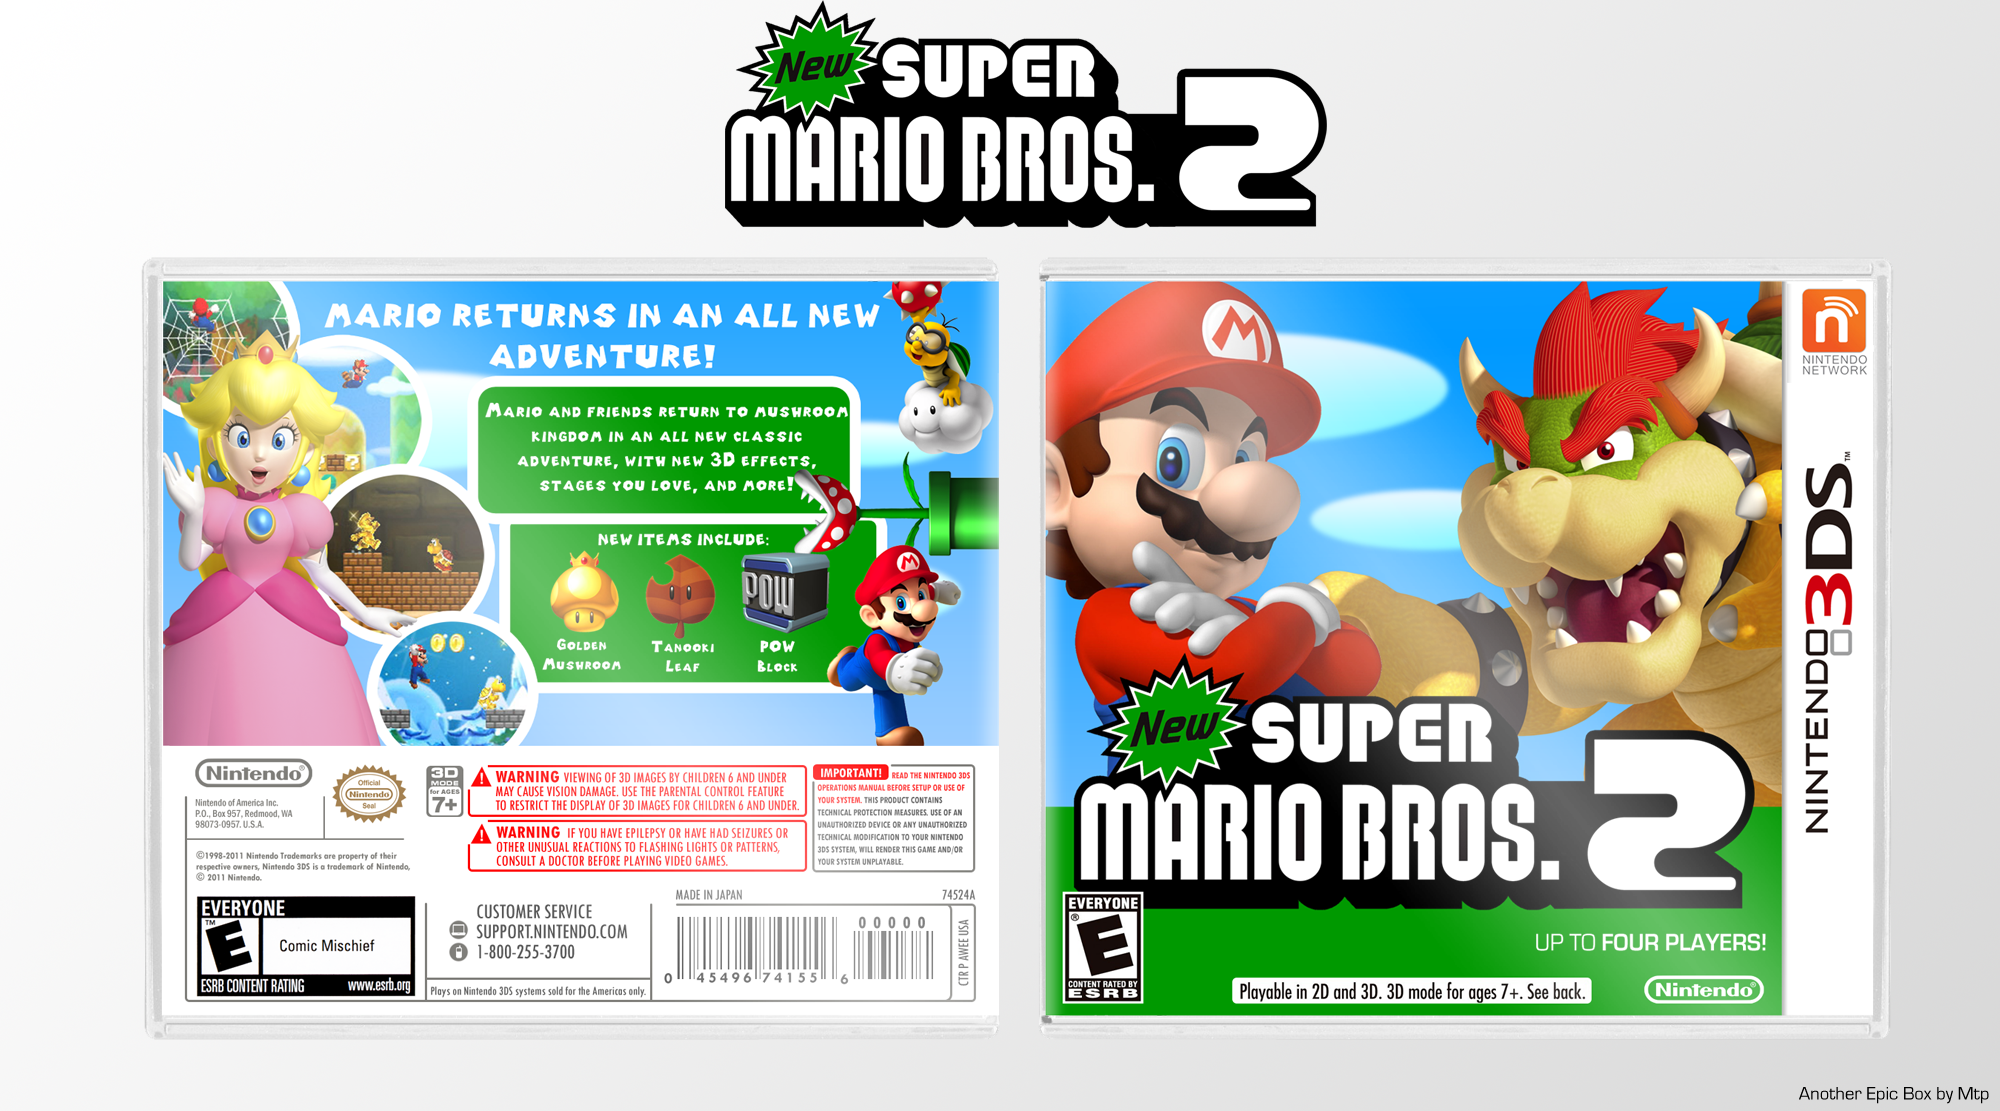 Viewing full size New Super Mario Bros. 2 box cover